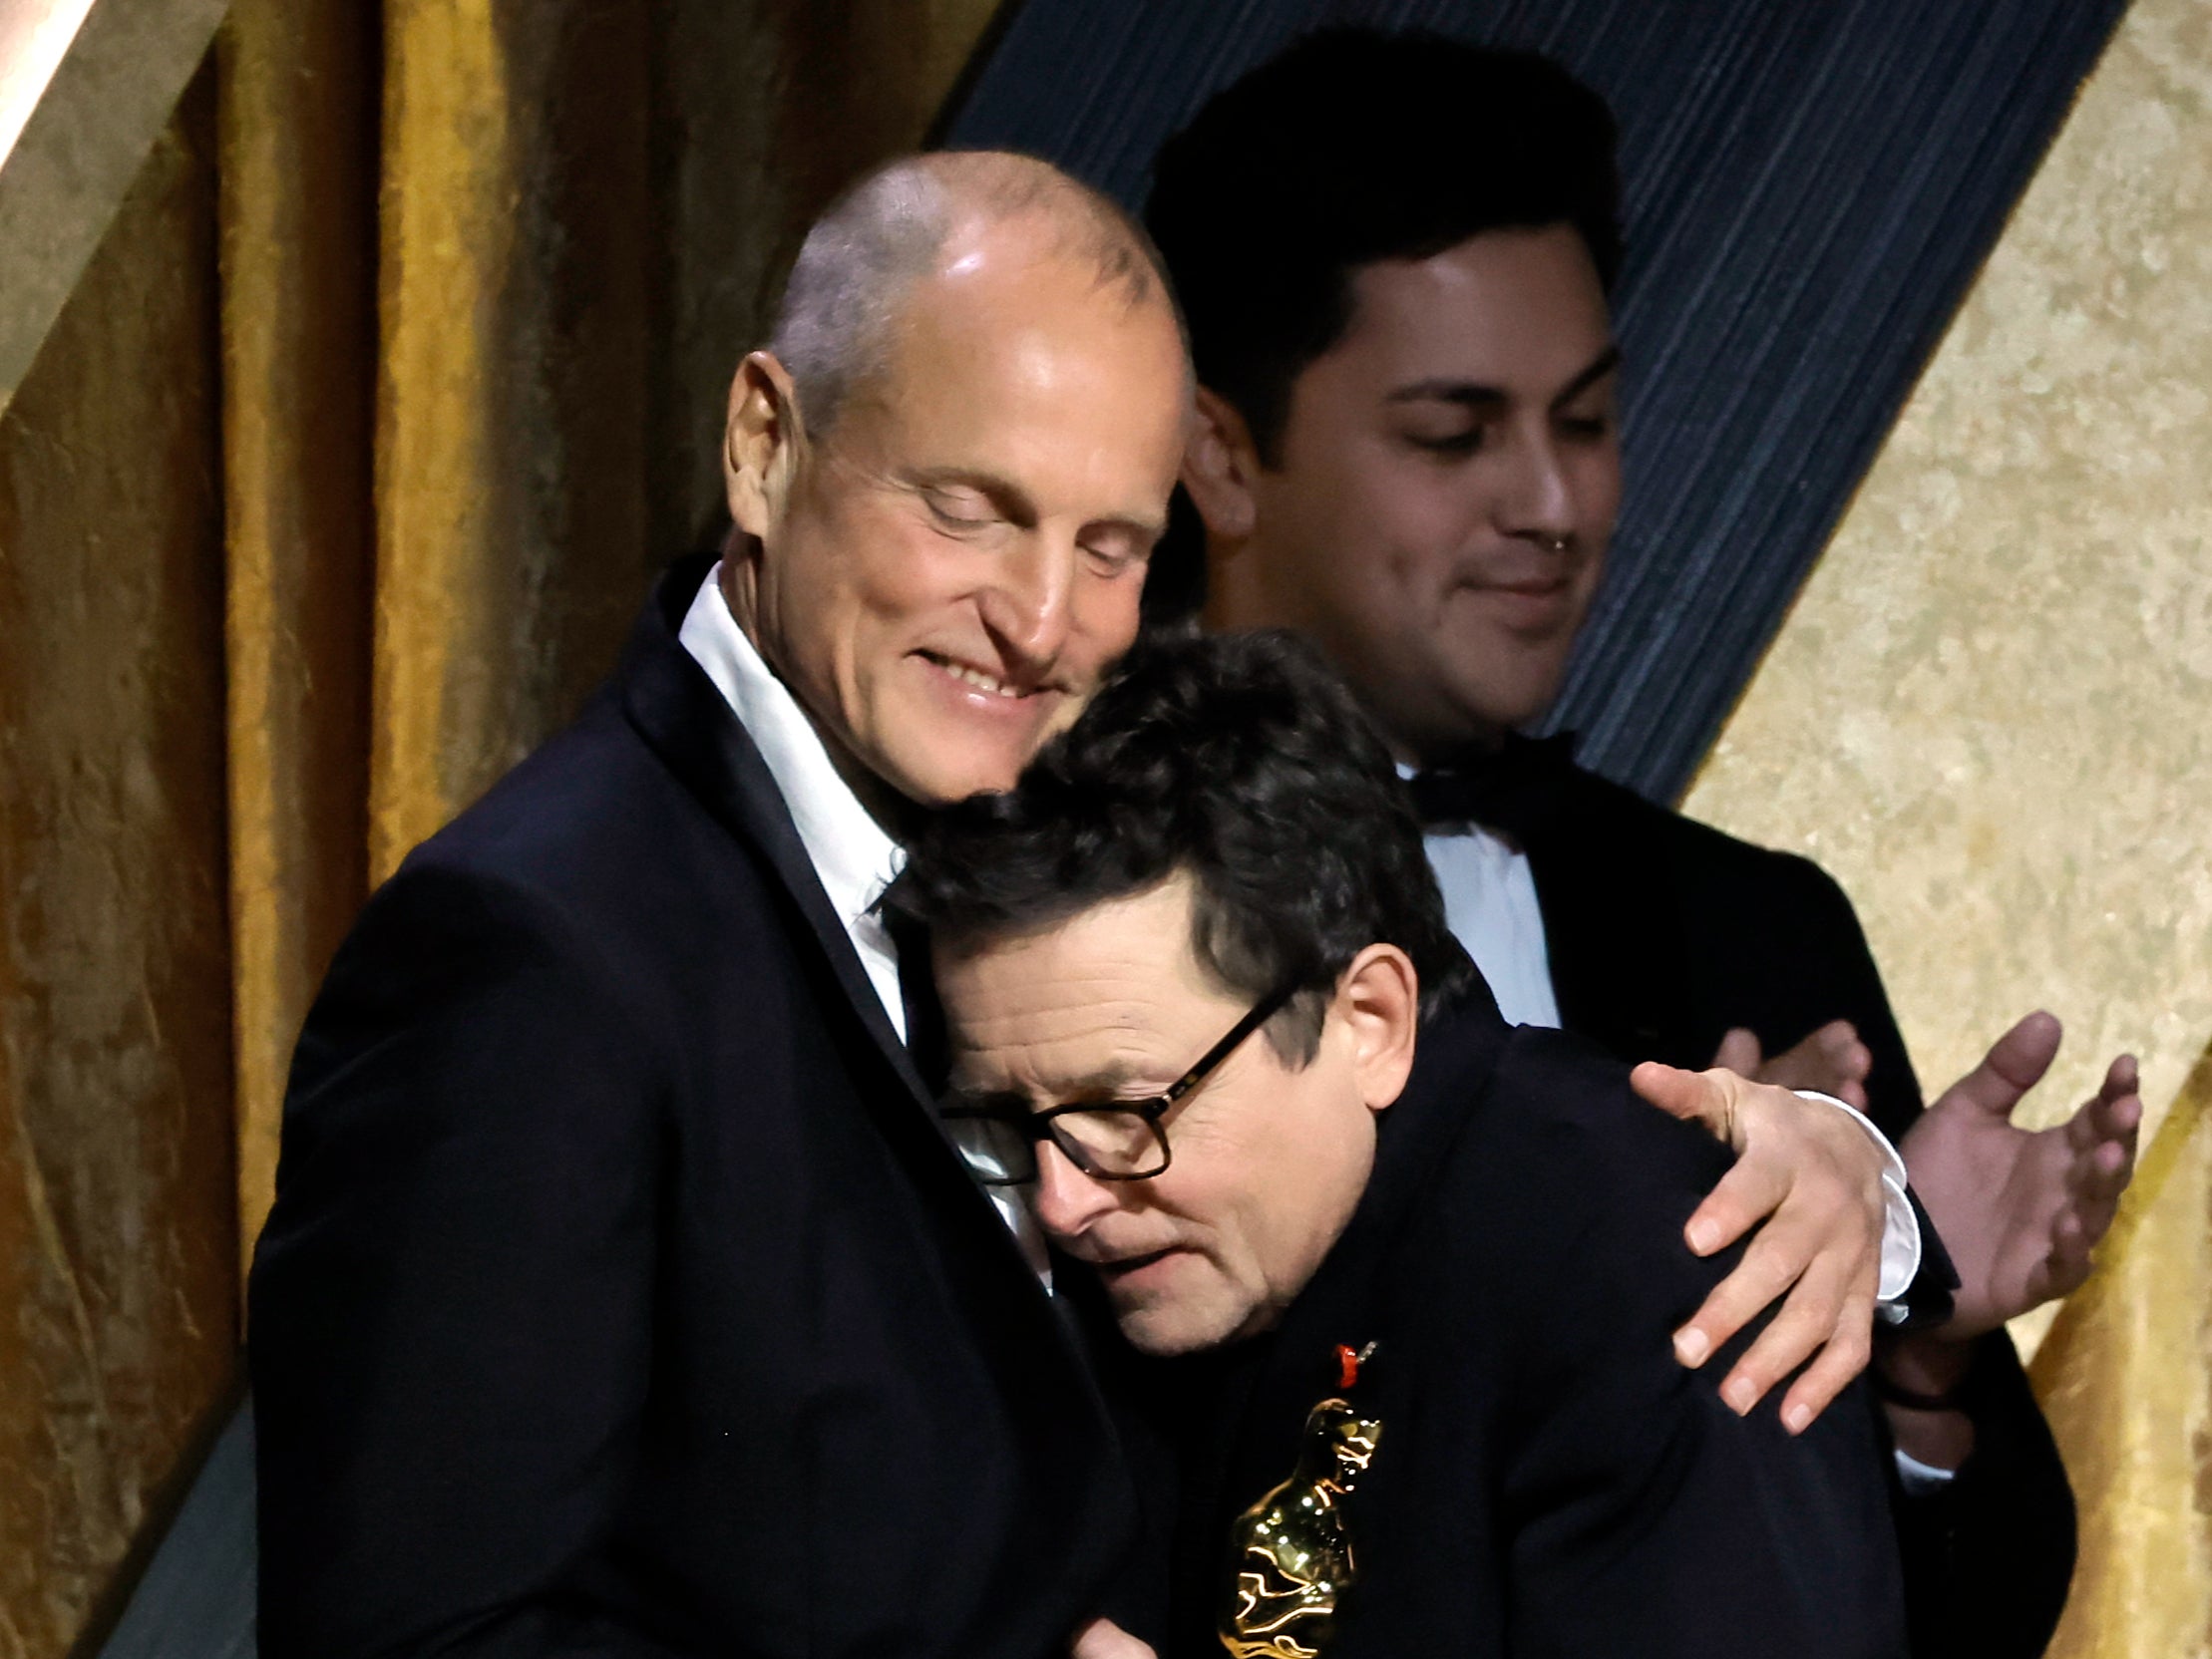 Woody Harrelson and Michael J Fox at the 2022 Governors Awards